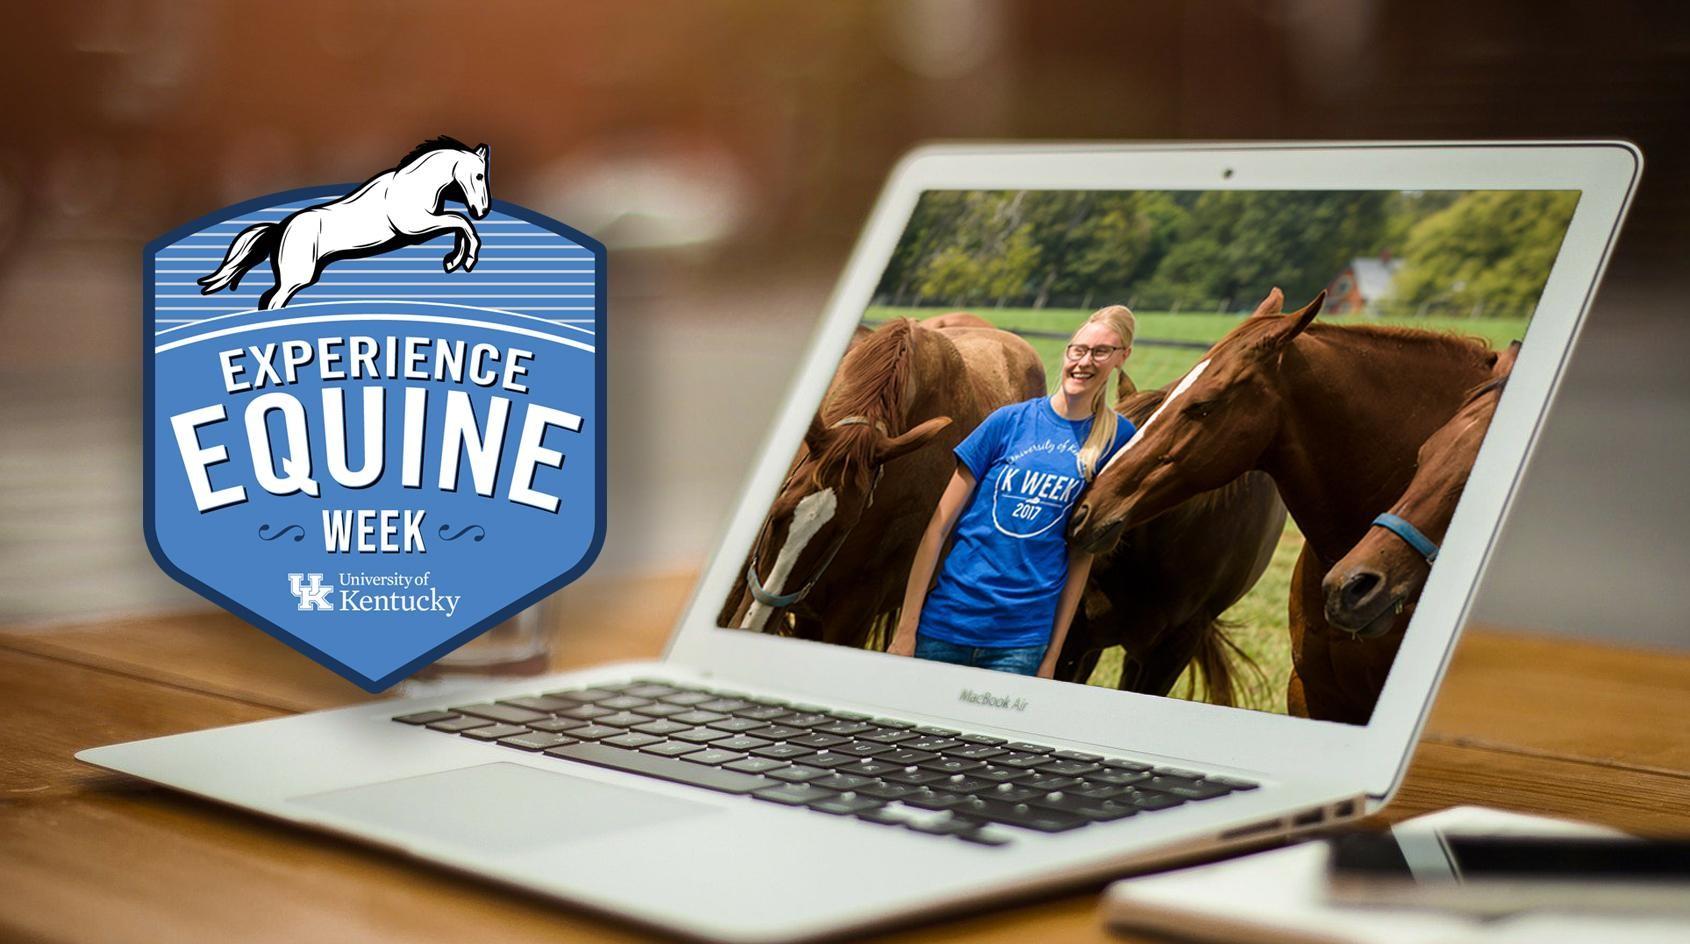 Marketing Graphic for Experience Equine Week